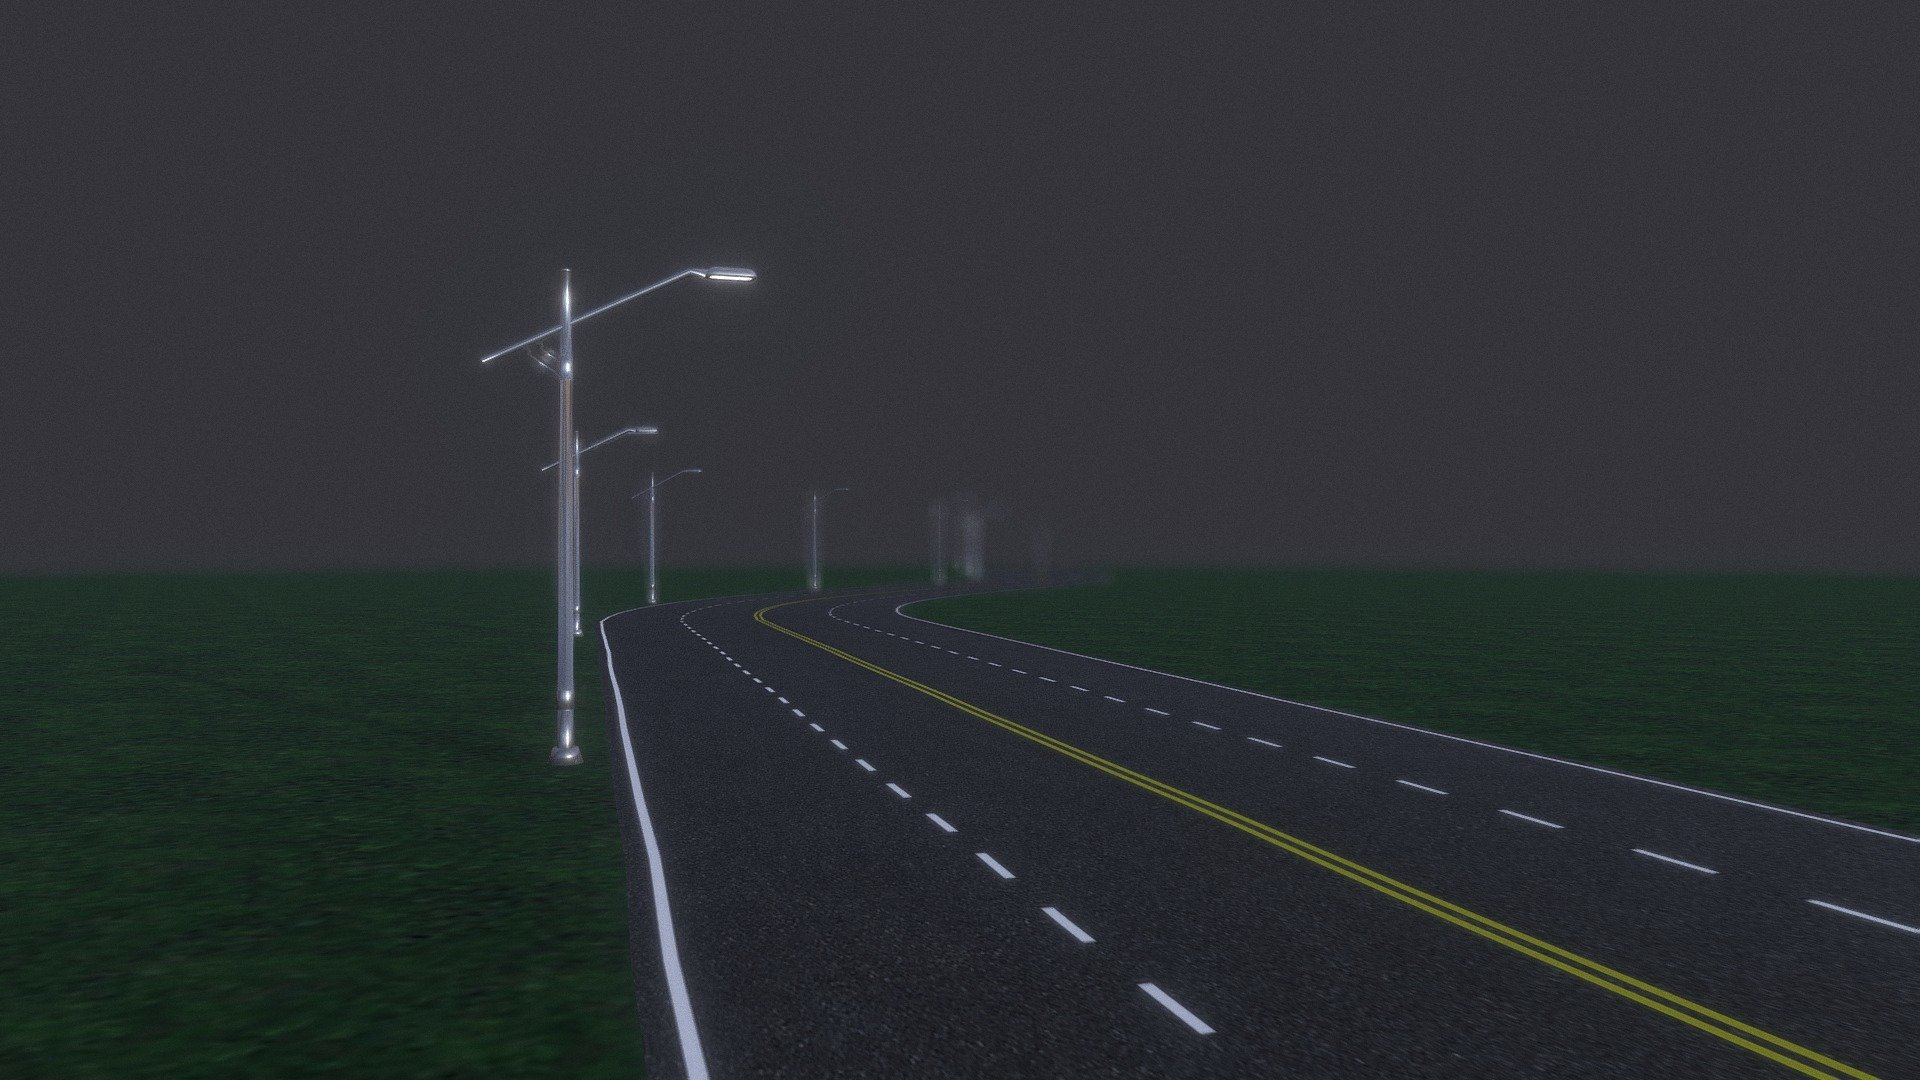 Hurrayyy🥳 it’s me stupids !!!

I bring this model to present you the highway road with the streets light on right side of the way. it is also mentioned as roadway or something, who cares!!!

Hope you found this 3D model usefull

Enjoy free 3D models!!!!!!!!!!!

ROY - Road / Highway - Download Free 3D model by ROY (@roy.gearloft.in) 3d model